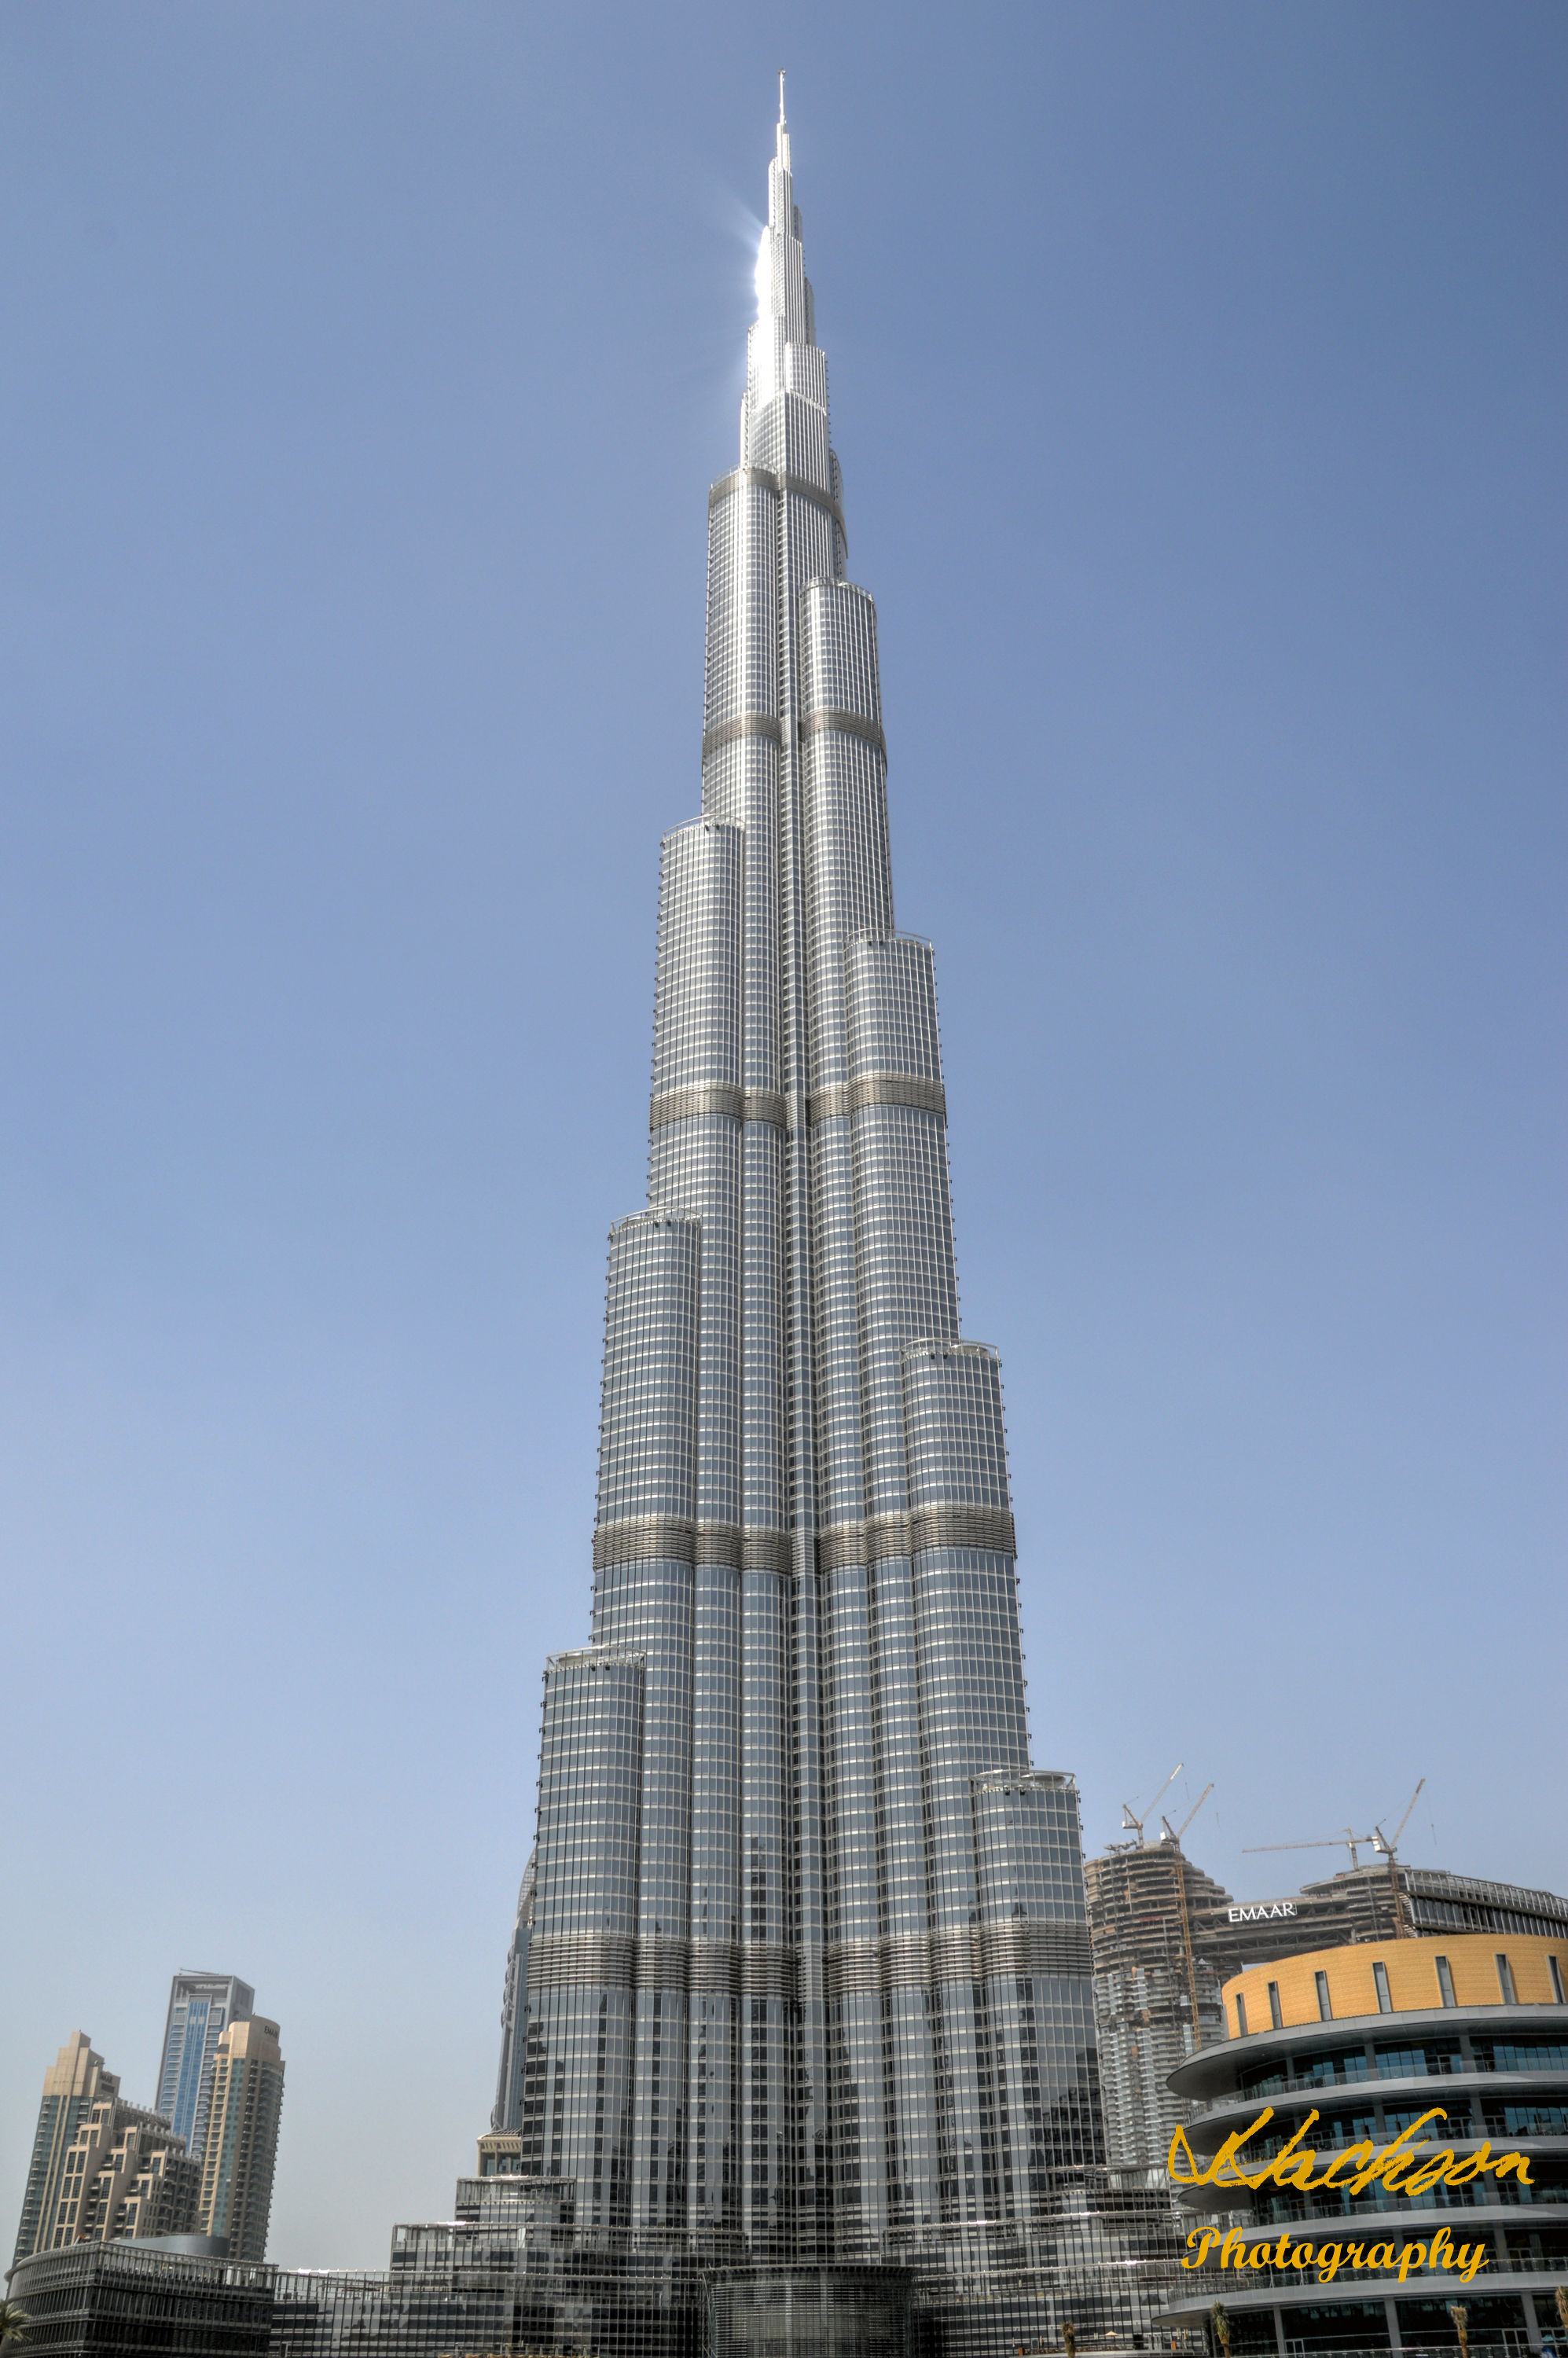 Whats The Highest Building In The World - www.inf-inet.com